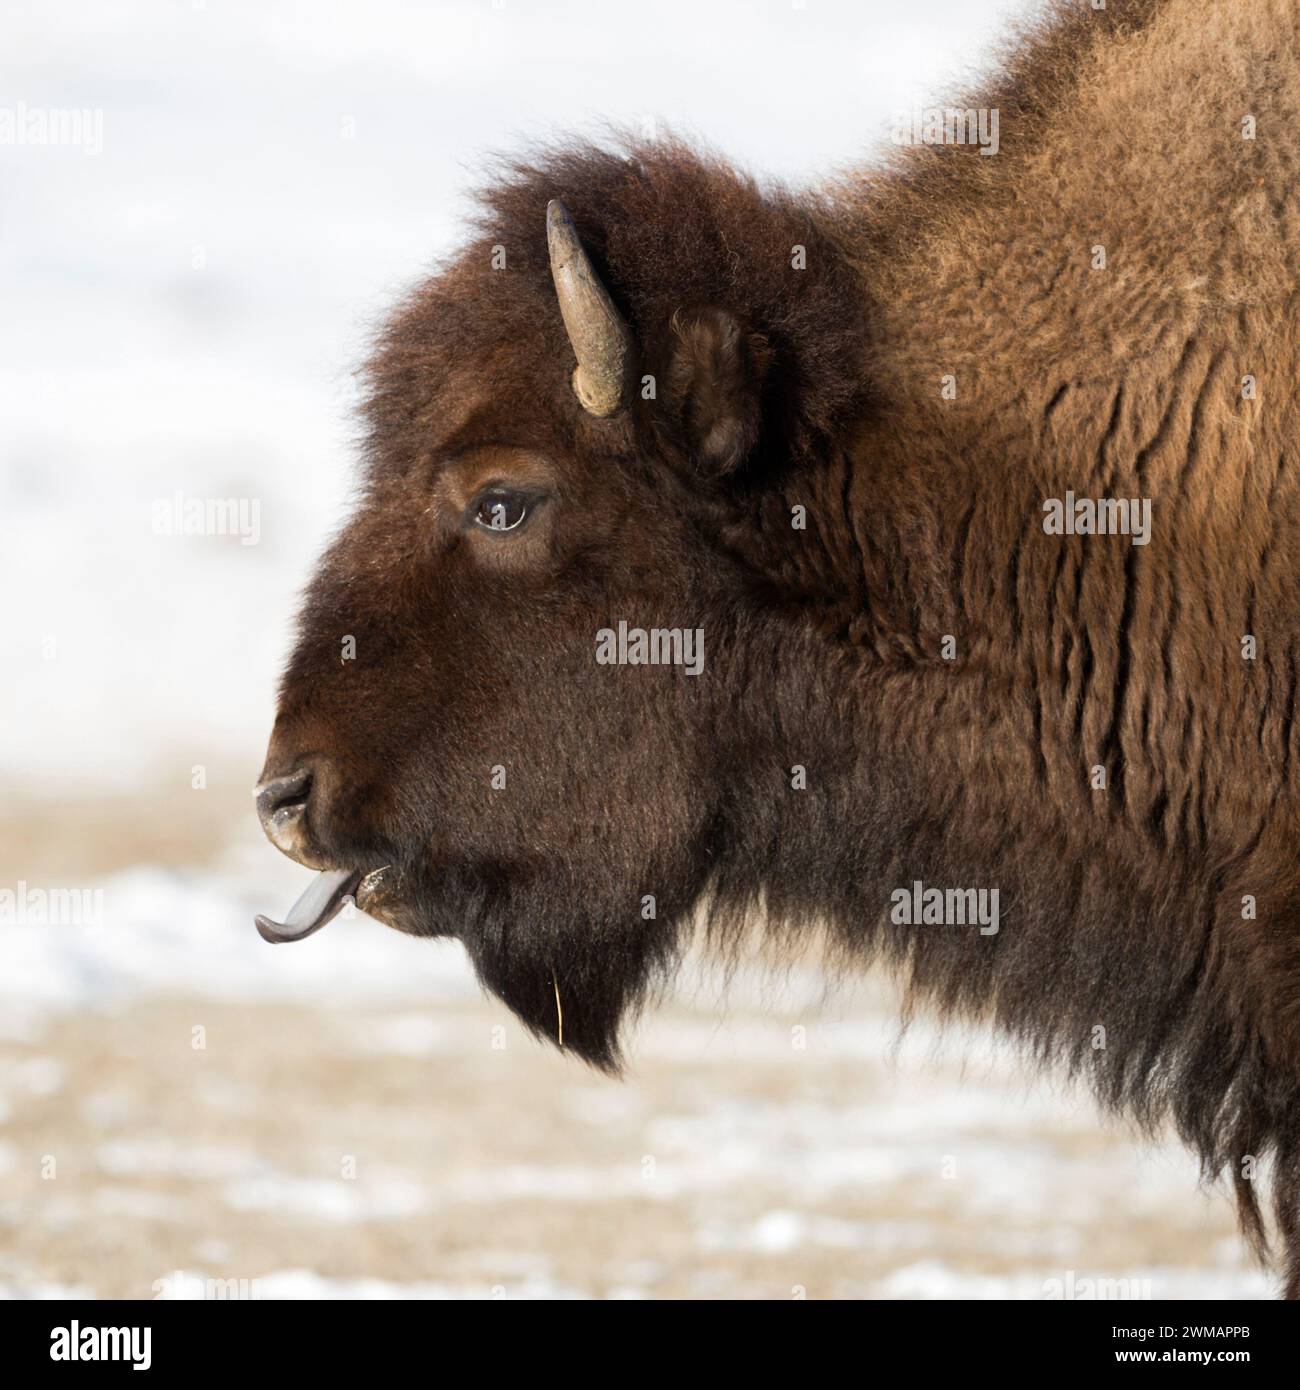 American Bison ( Bison bison ) in winter, licking its blue tongue, detailed headshot, wildlife, Yellowstone National Park, Wyoming, USA. Stock Photo